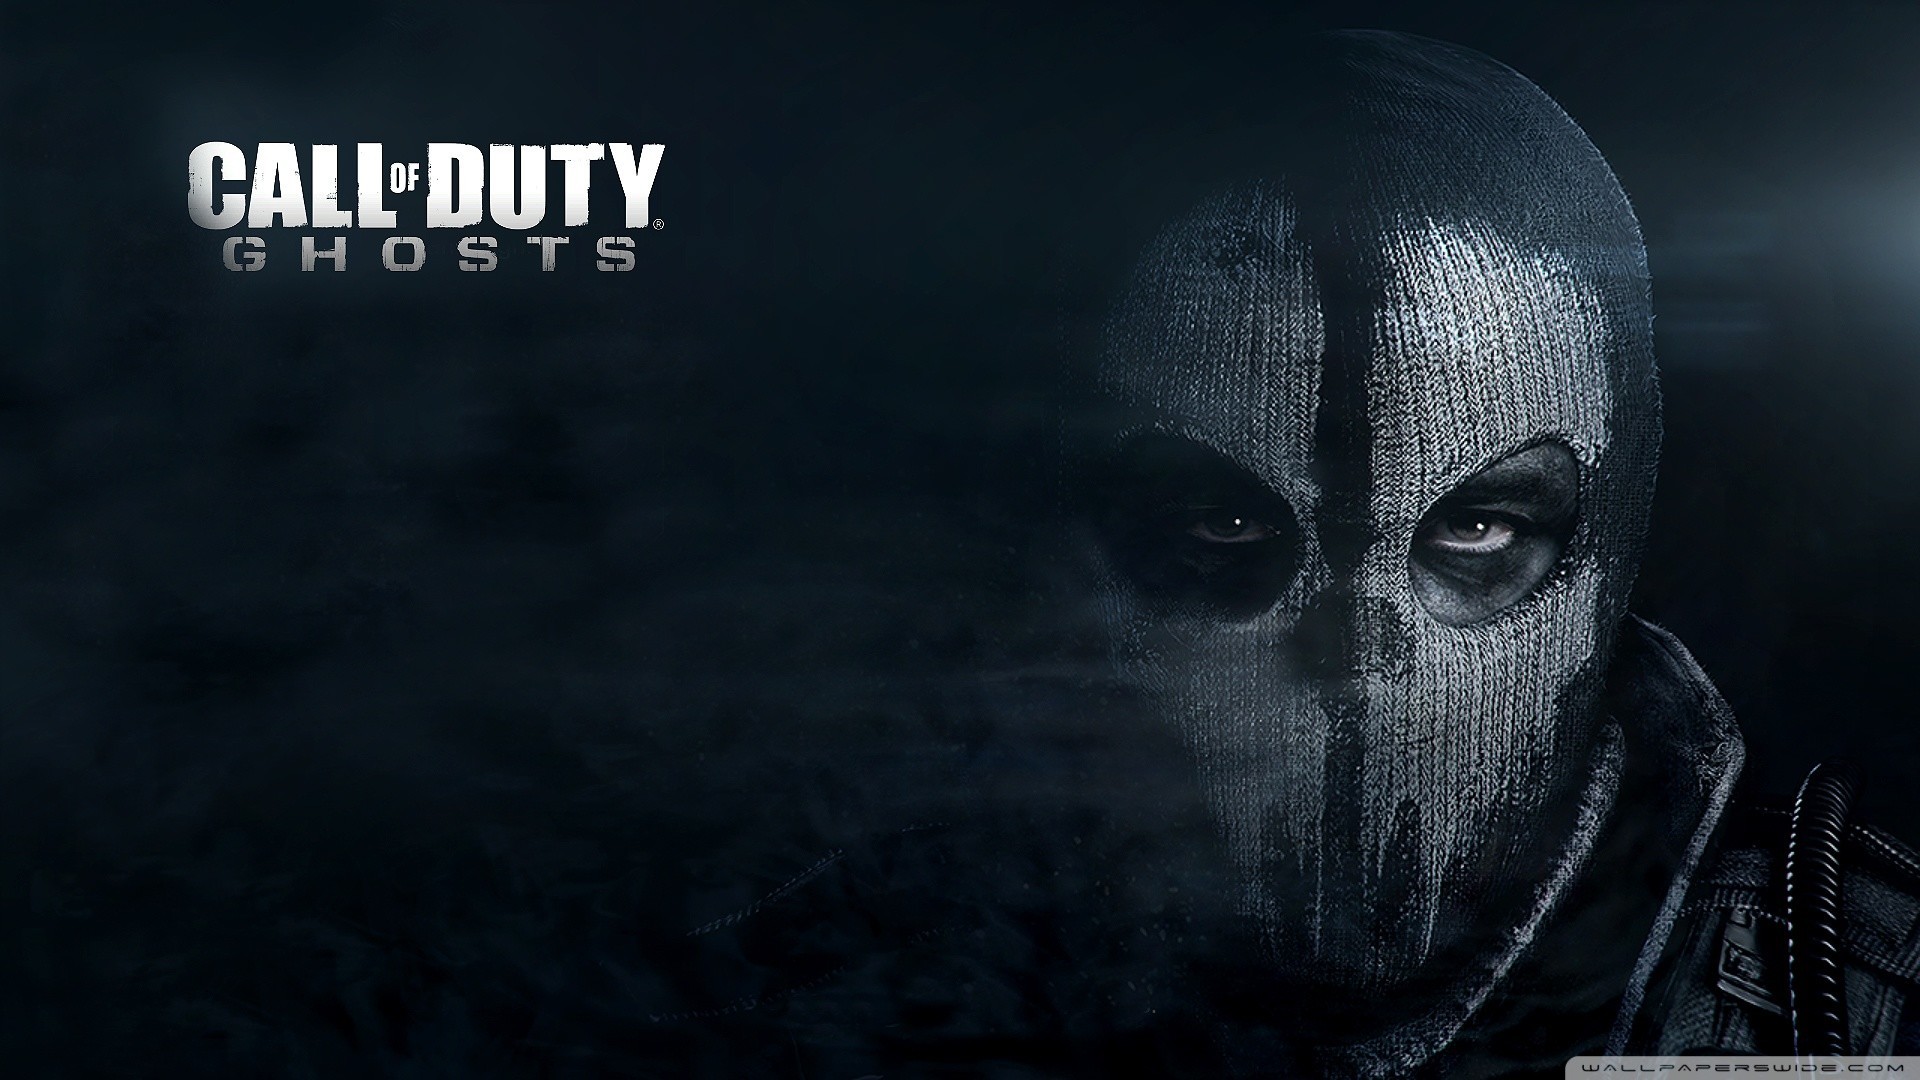 Call of duty ghosts wallpapers